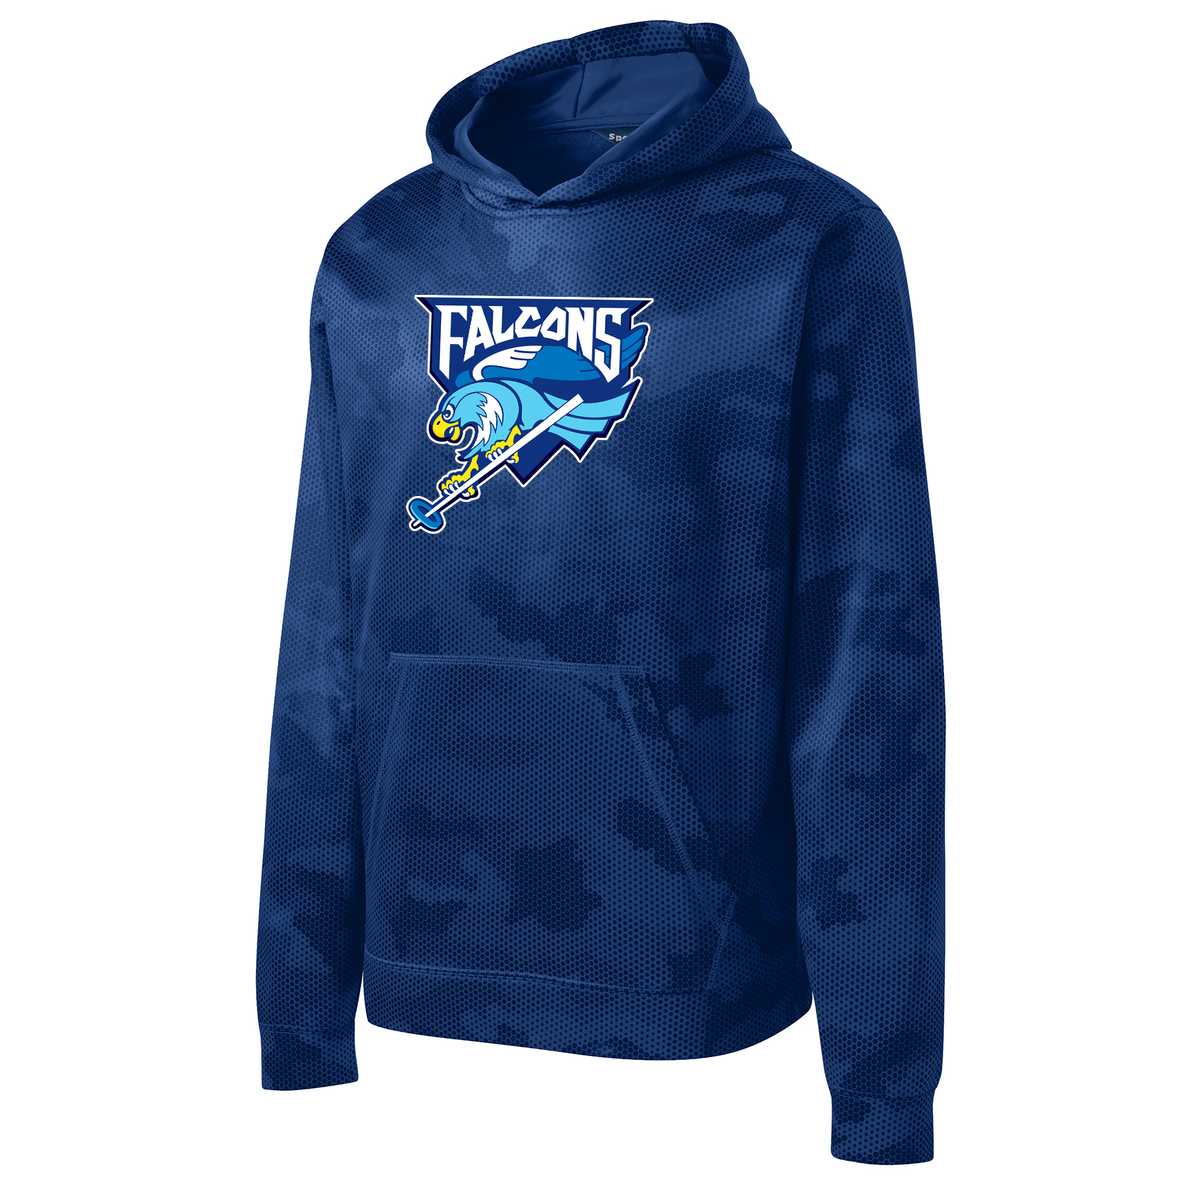 Falcons Ringettes Youth CamoHex Pullover